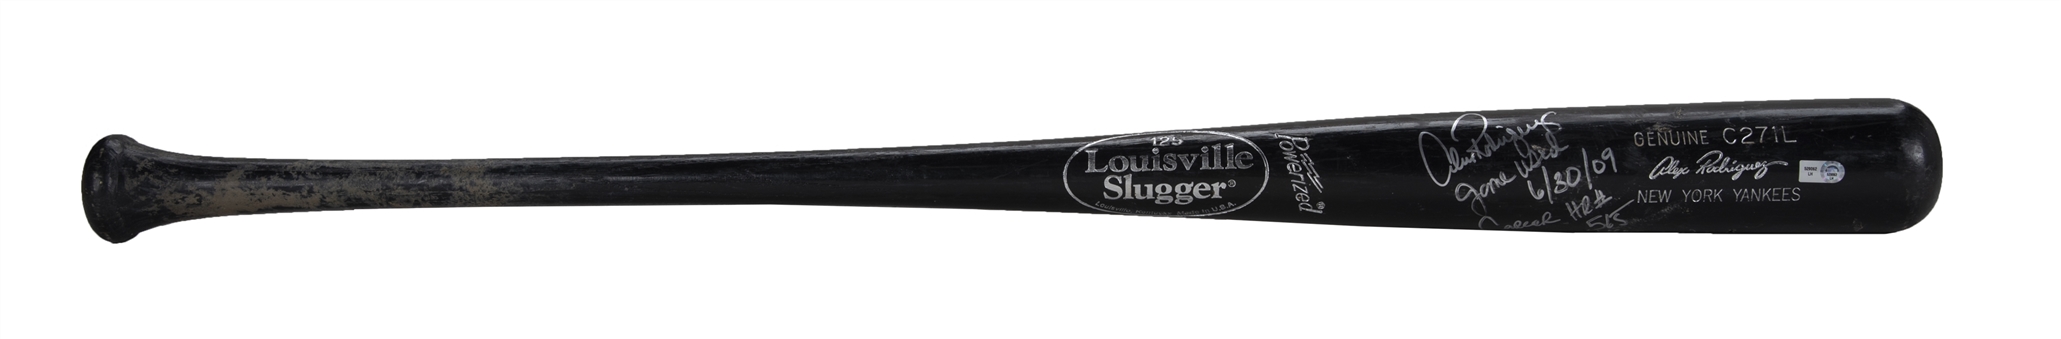 2009 Alex Rodriguez Game Used & Signed Louisville Slugger C271L Model Bat Used For Career Home Run #565 (PSA/DNA GU 10, MLB Authenticated & Beckett)